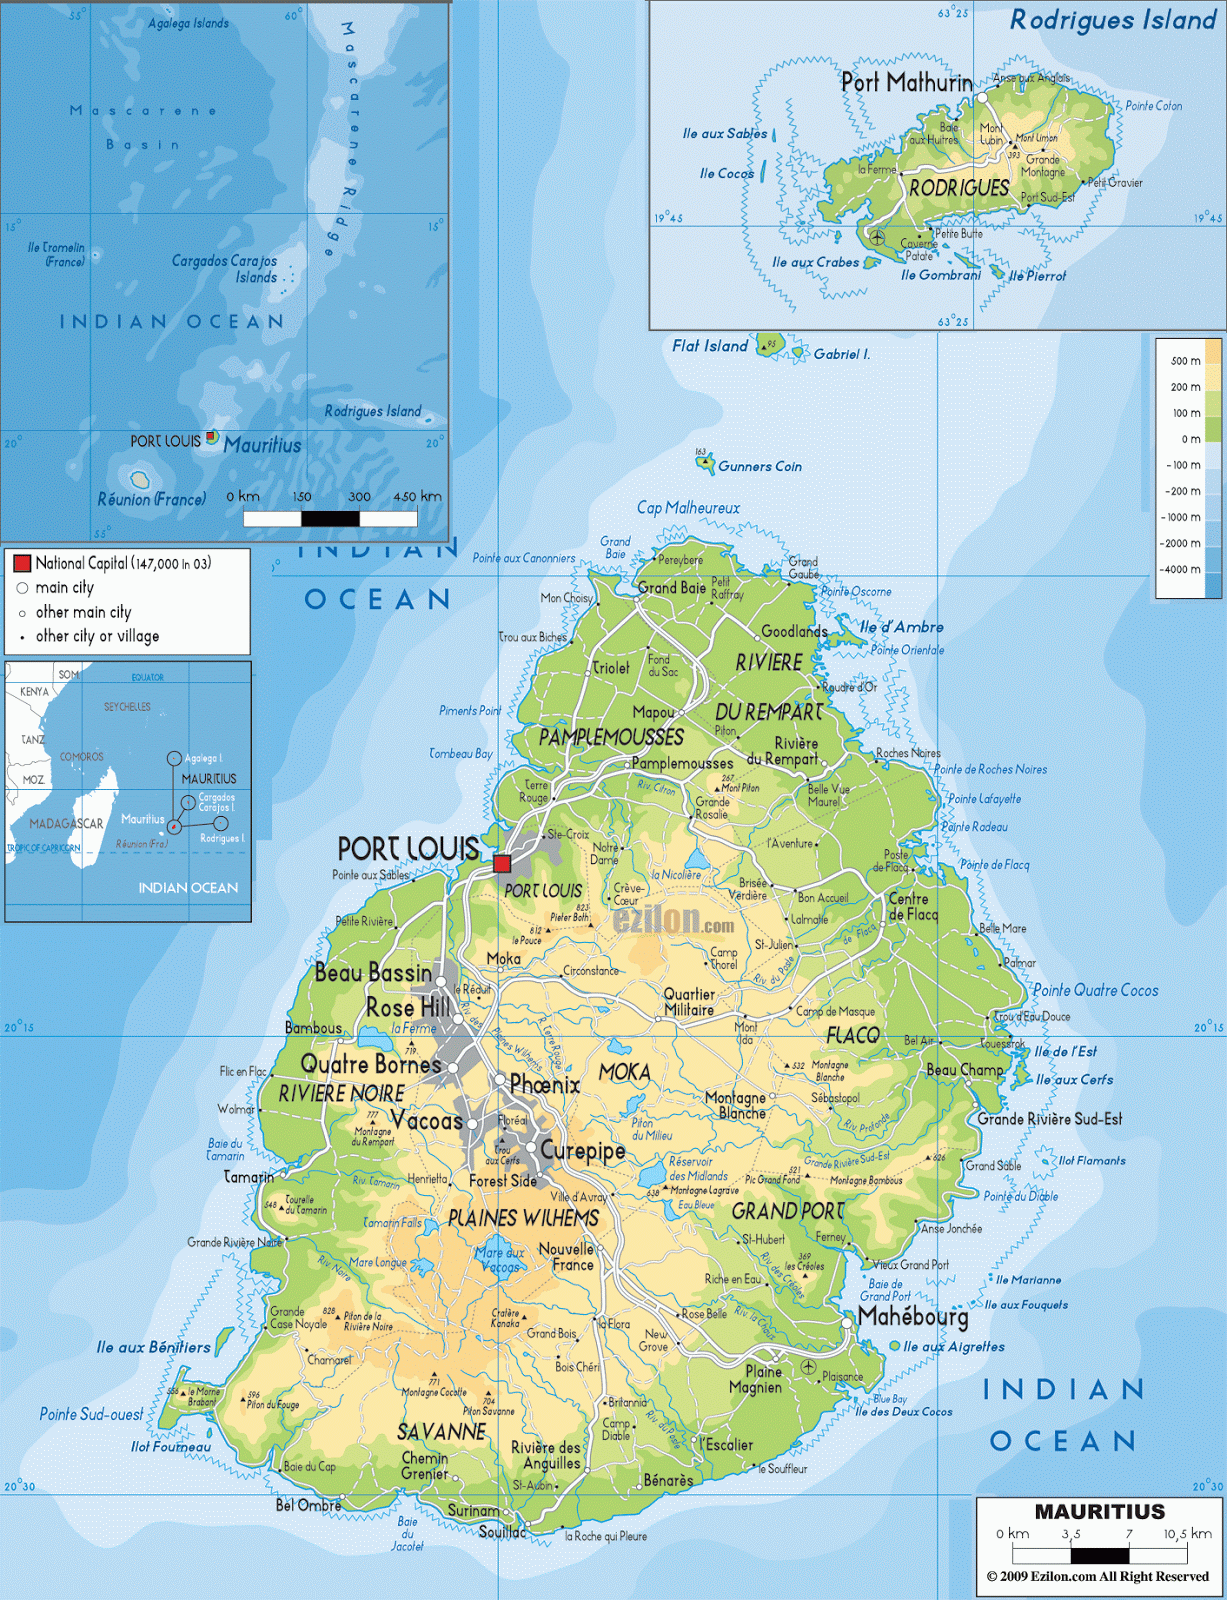 MAURITIUS - GEOGRAPHICAL MAPS OF MAURITIUS - Global Encyclopedia™